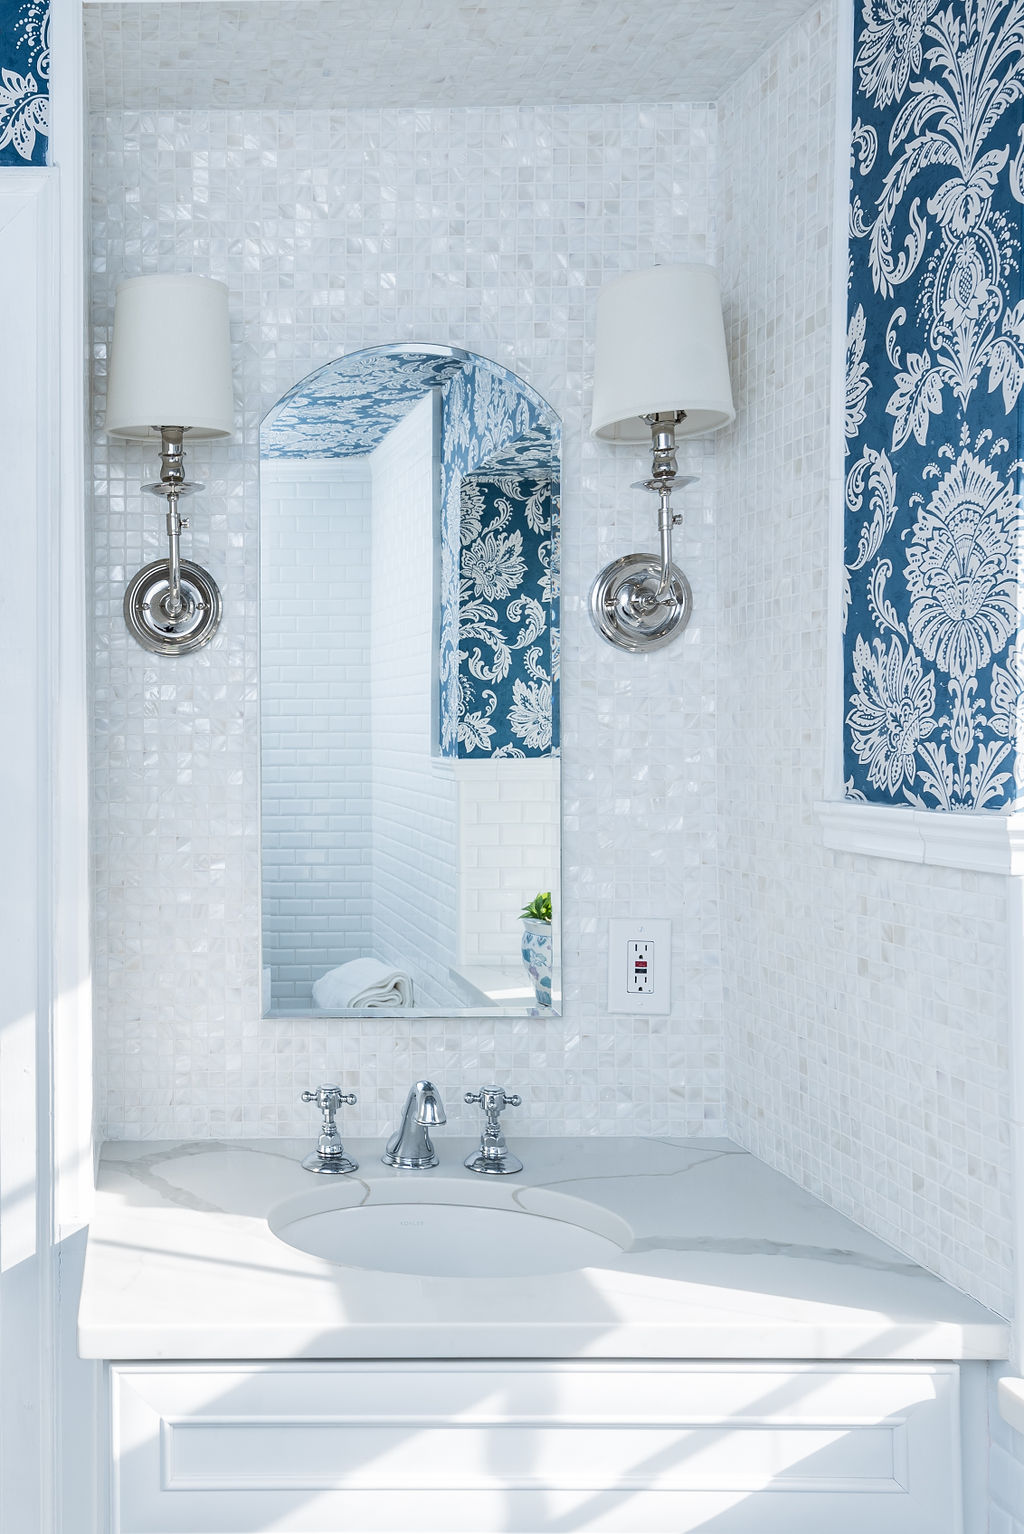 mosaic tile wall above sink